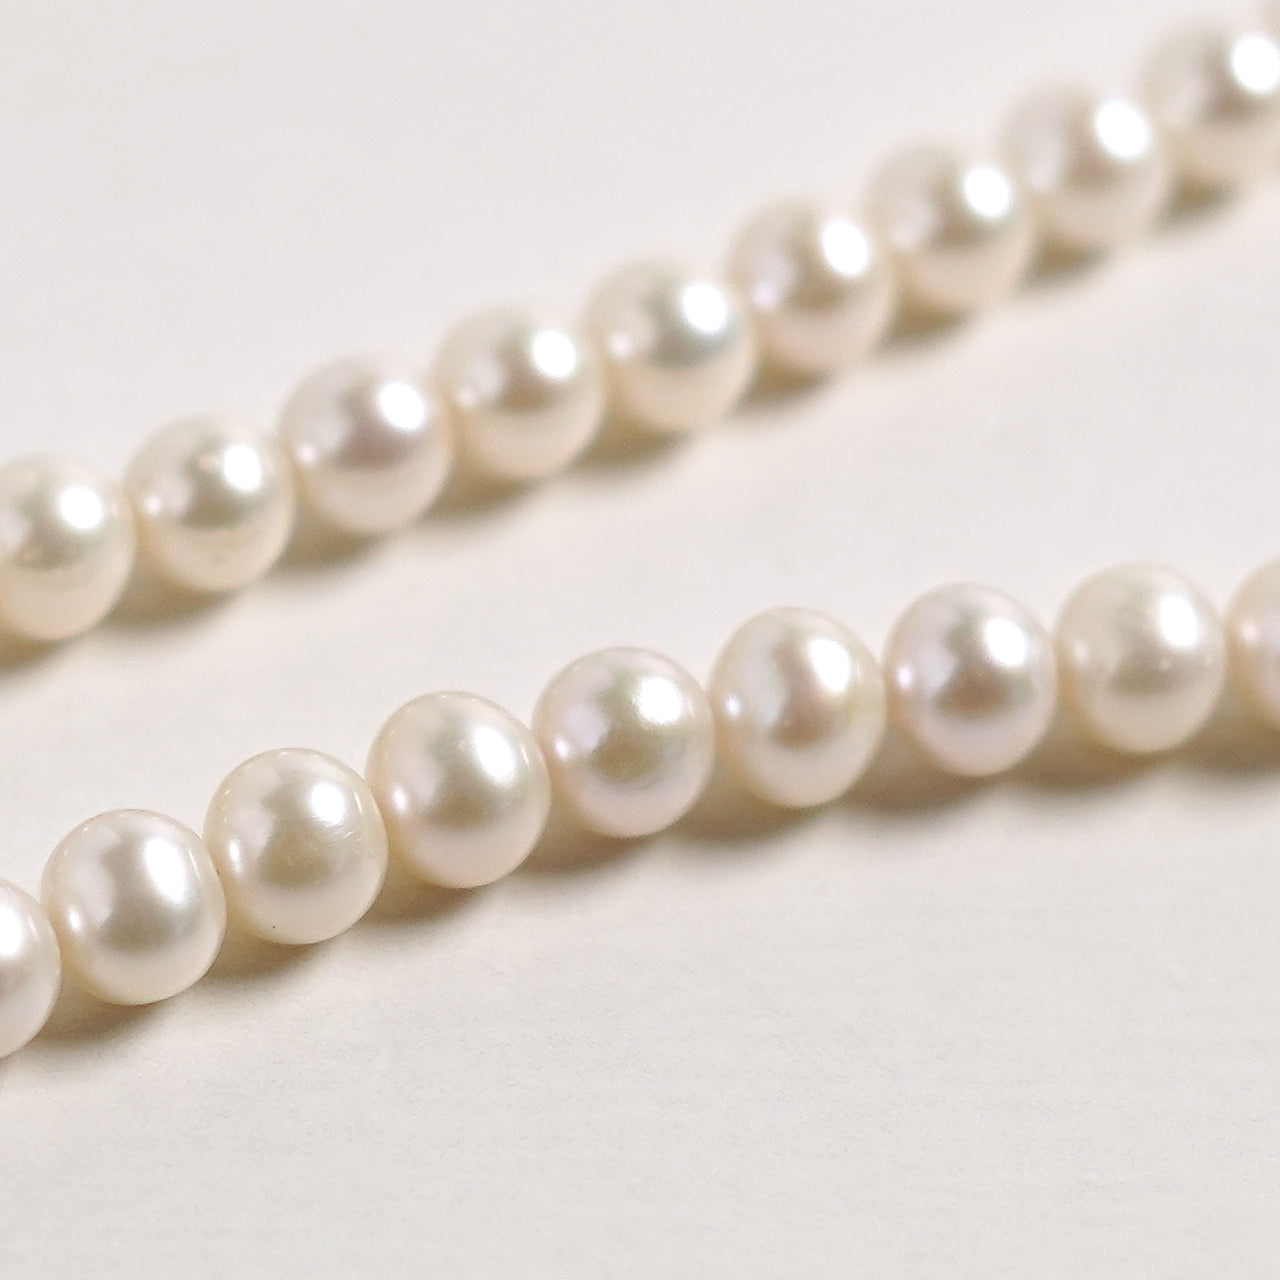 ReFaire  ルフェール Boys Pearl Necklece 925 ボーイズ パール ネックレス RC-NK013 【送料無料】